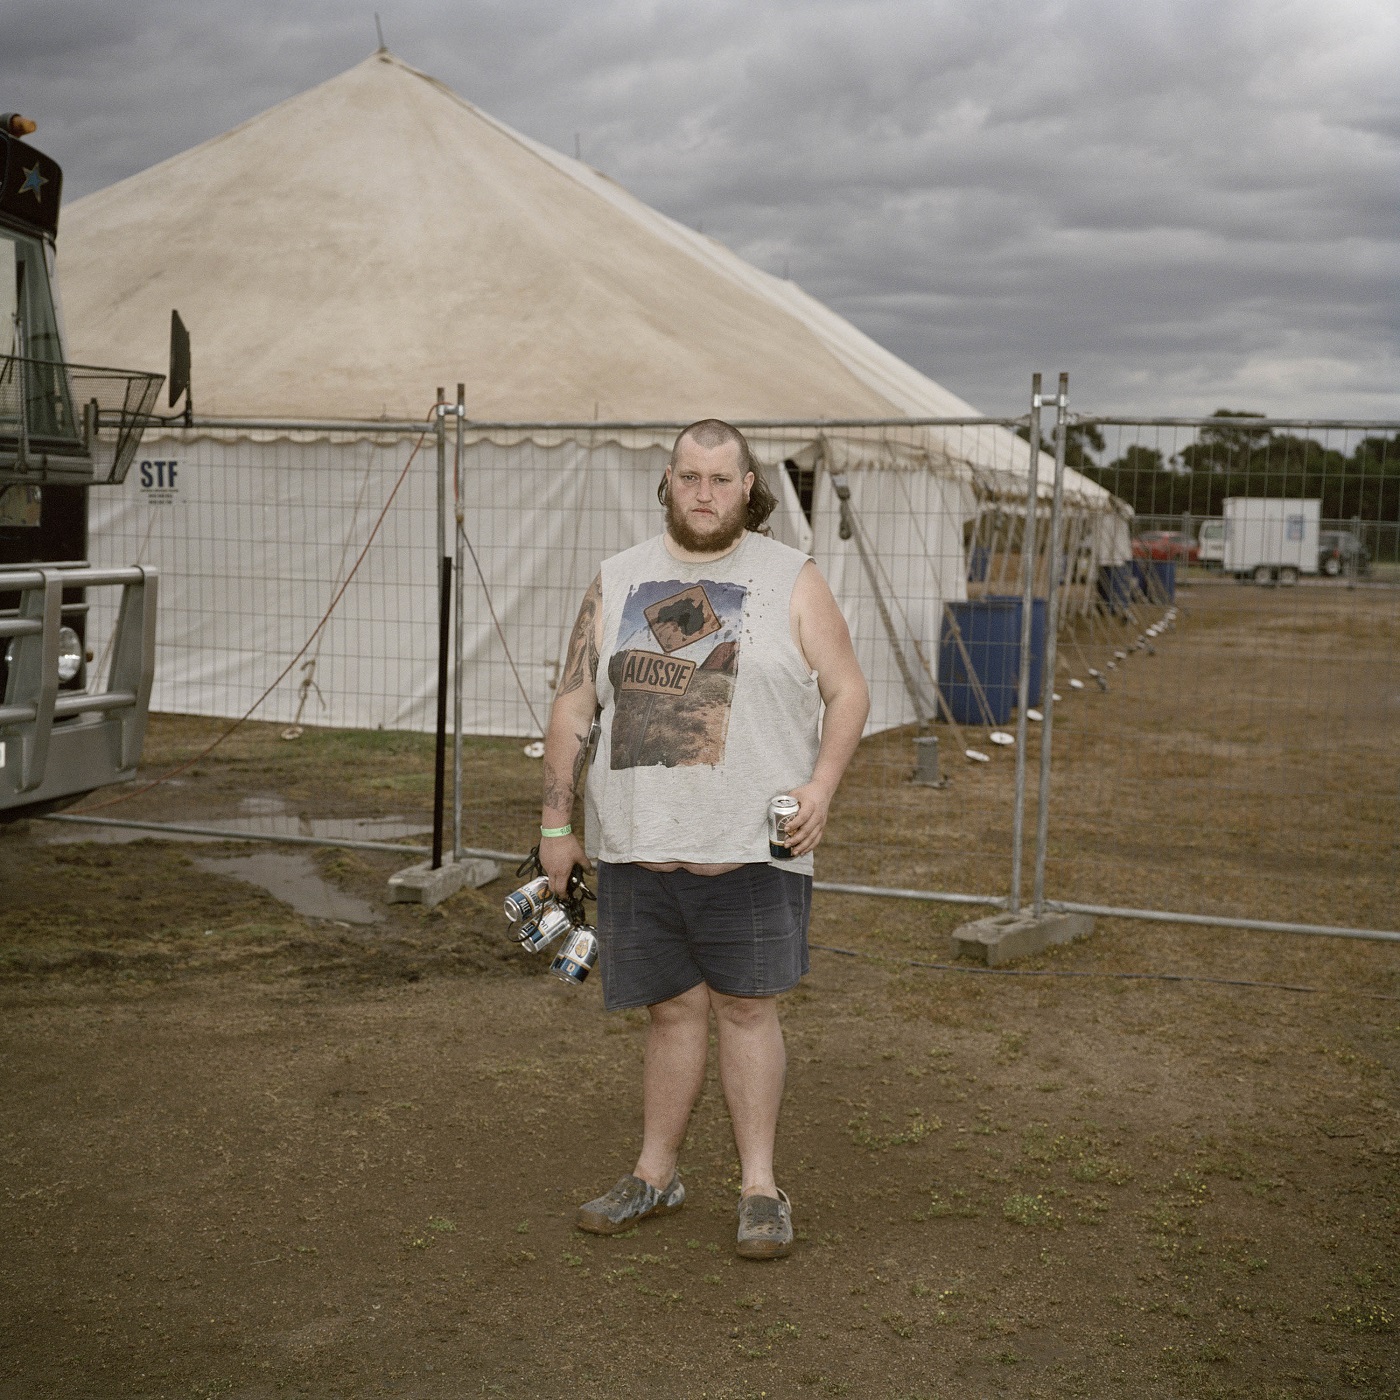 A man with a six pack of alcohol at a dusty ball site.